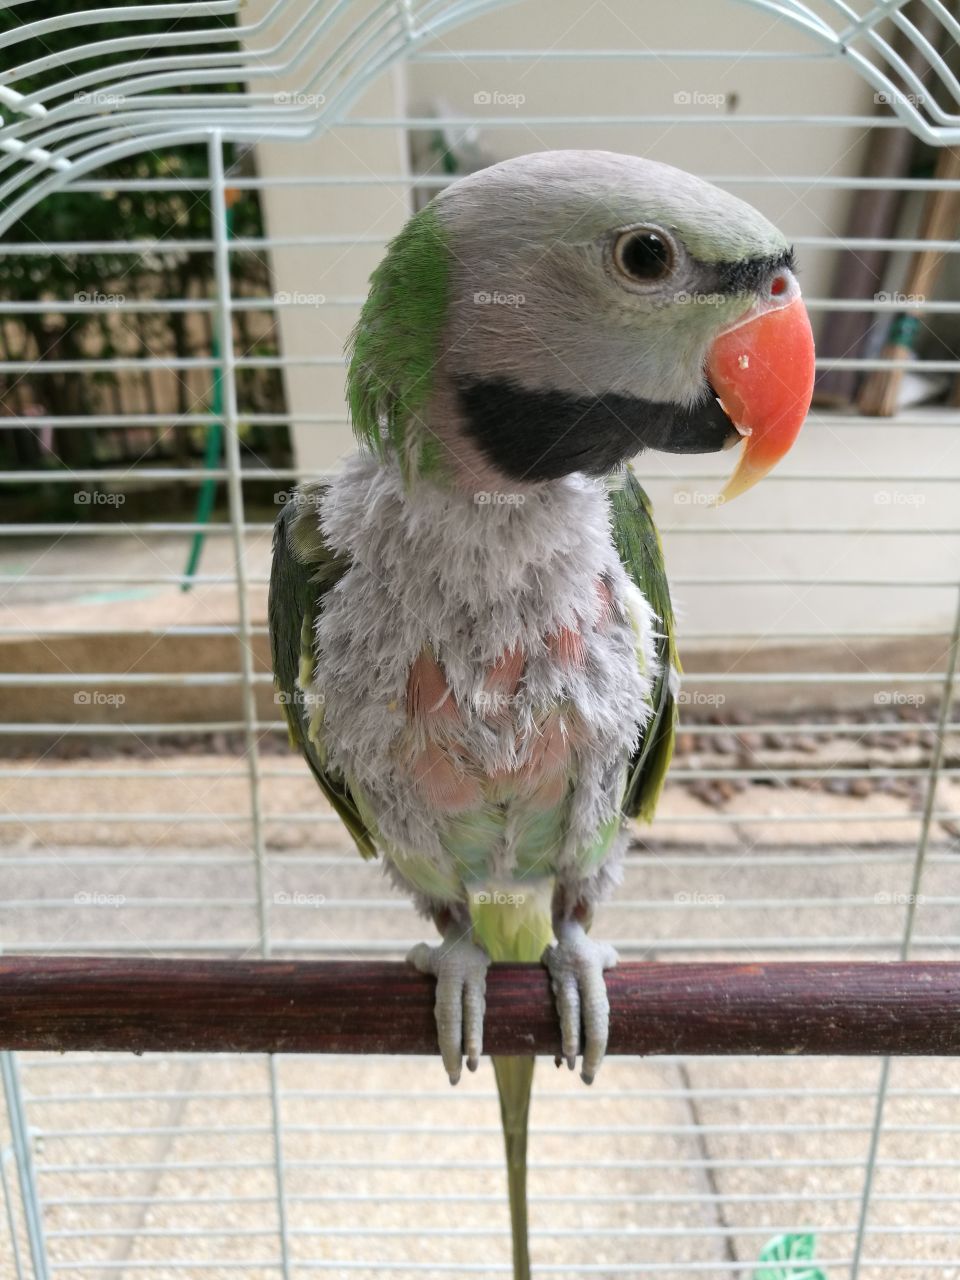 Cute parrot with beautiful eyes and red beak catch on wood perch in cage.